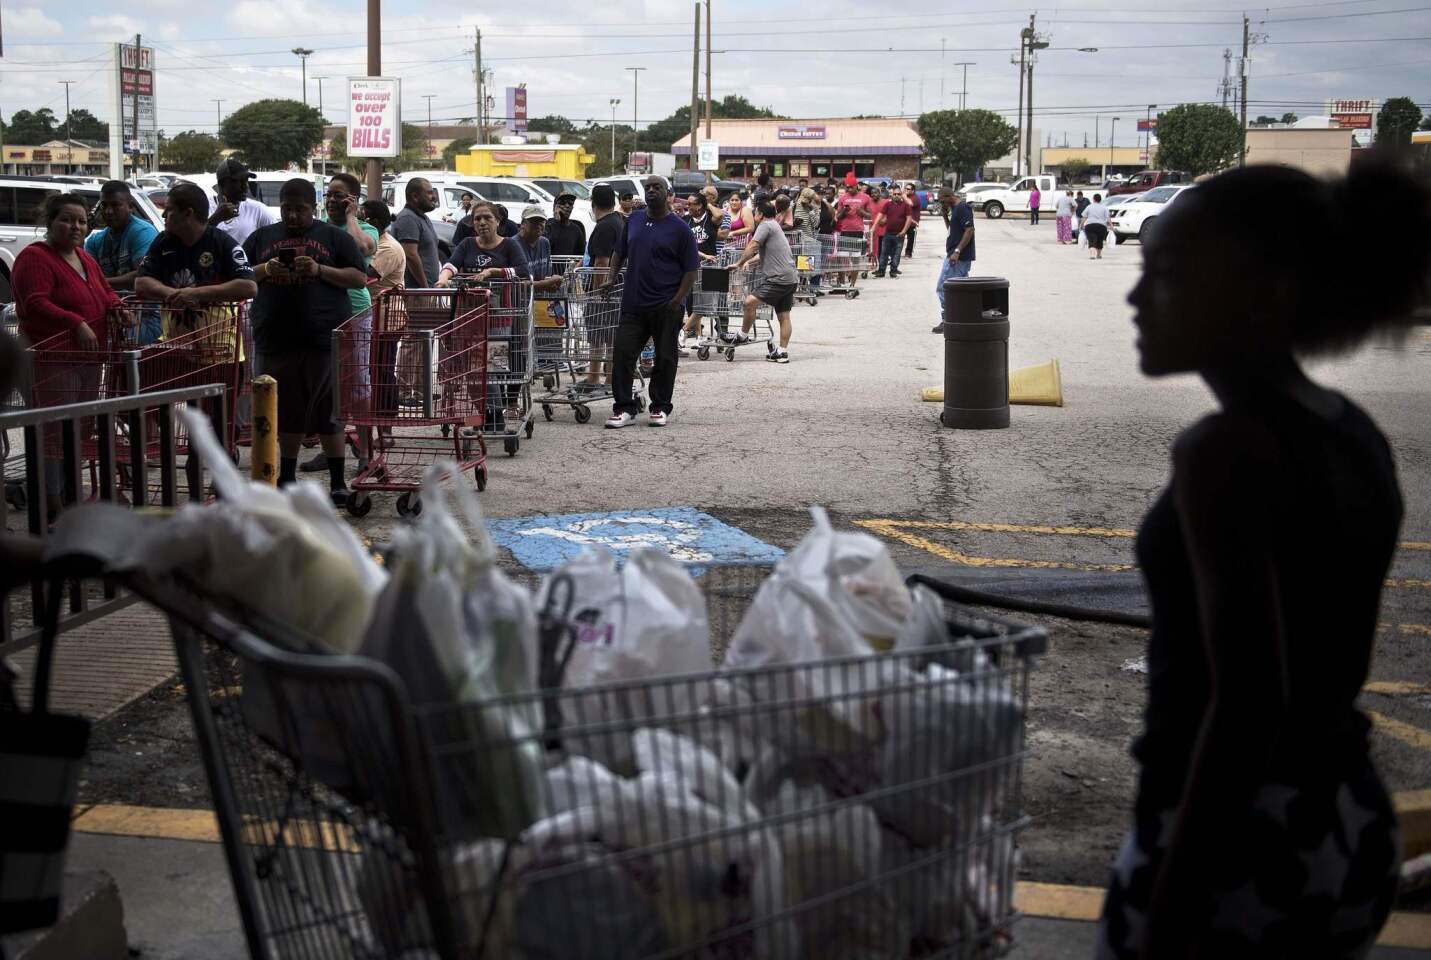 People wait in line to buy groceries at a Food Town during the aftermath of Tropical Storm Harvey.